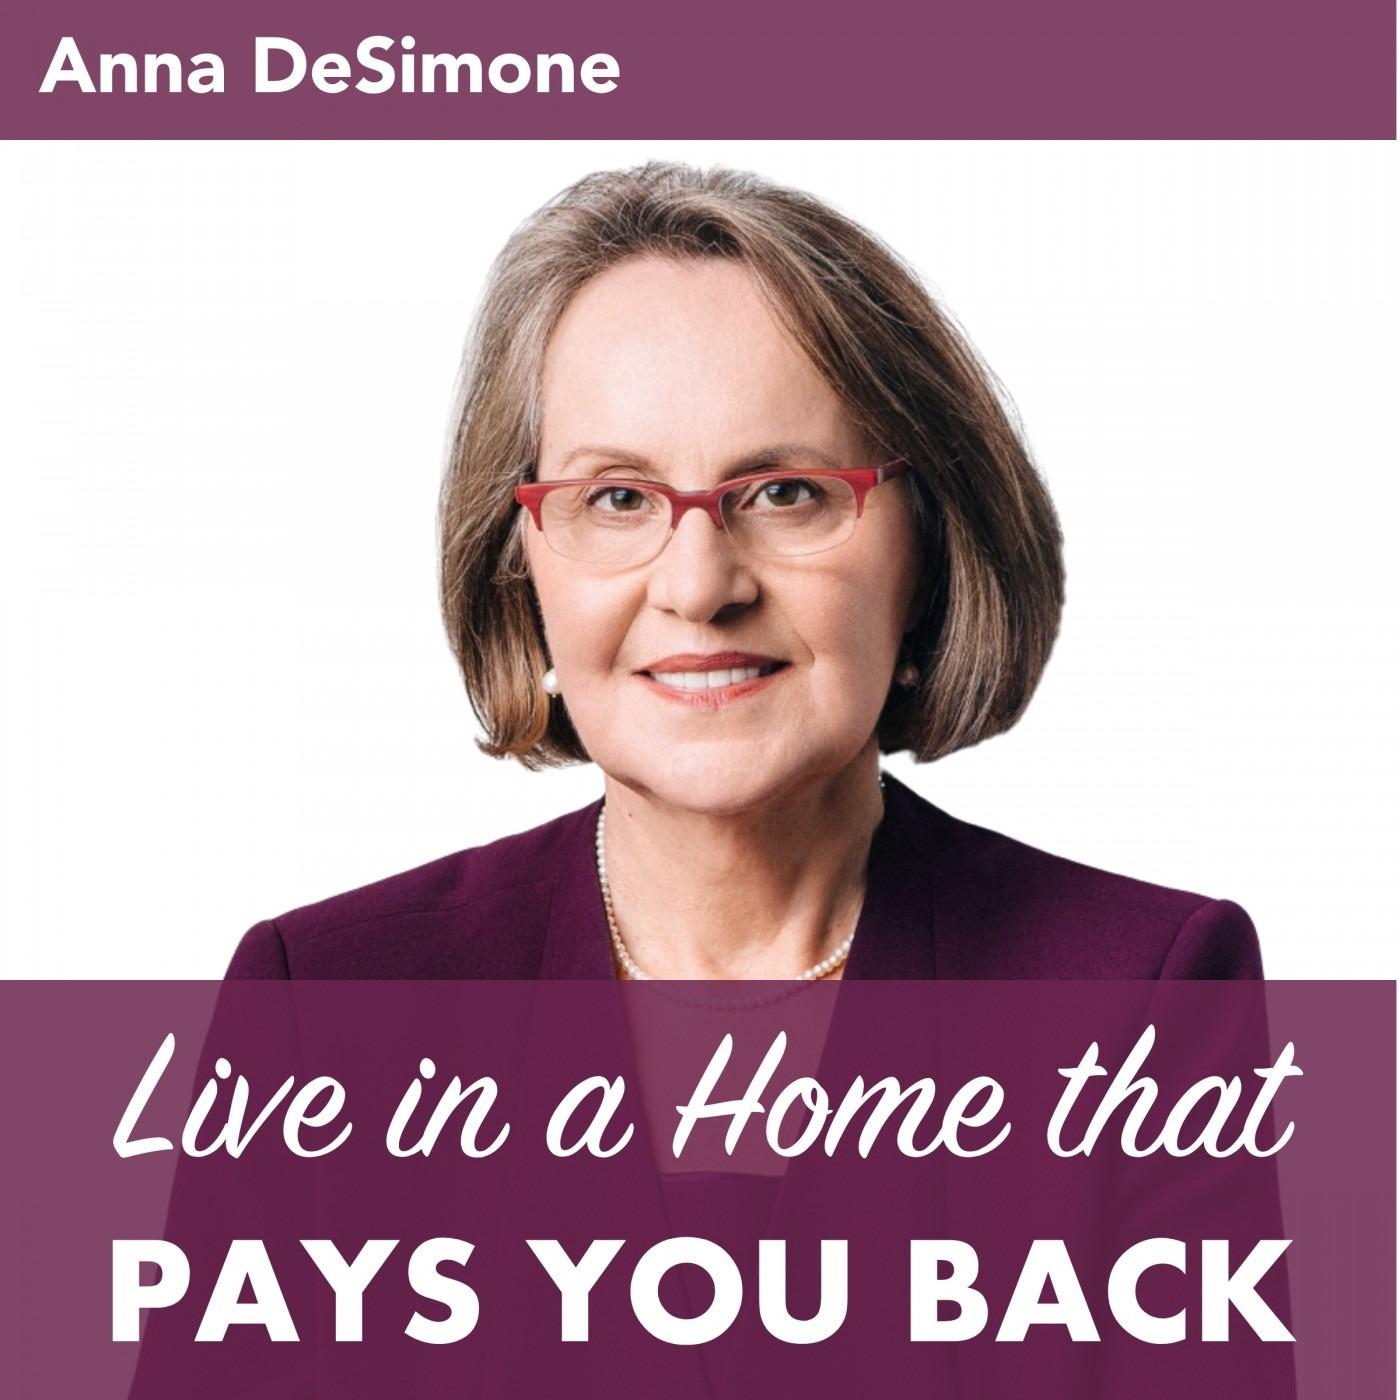 Live in a Home that Pays You Back